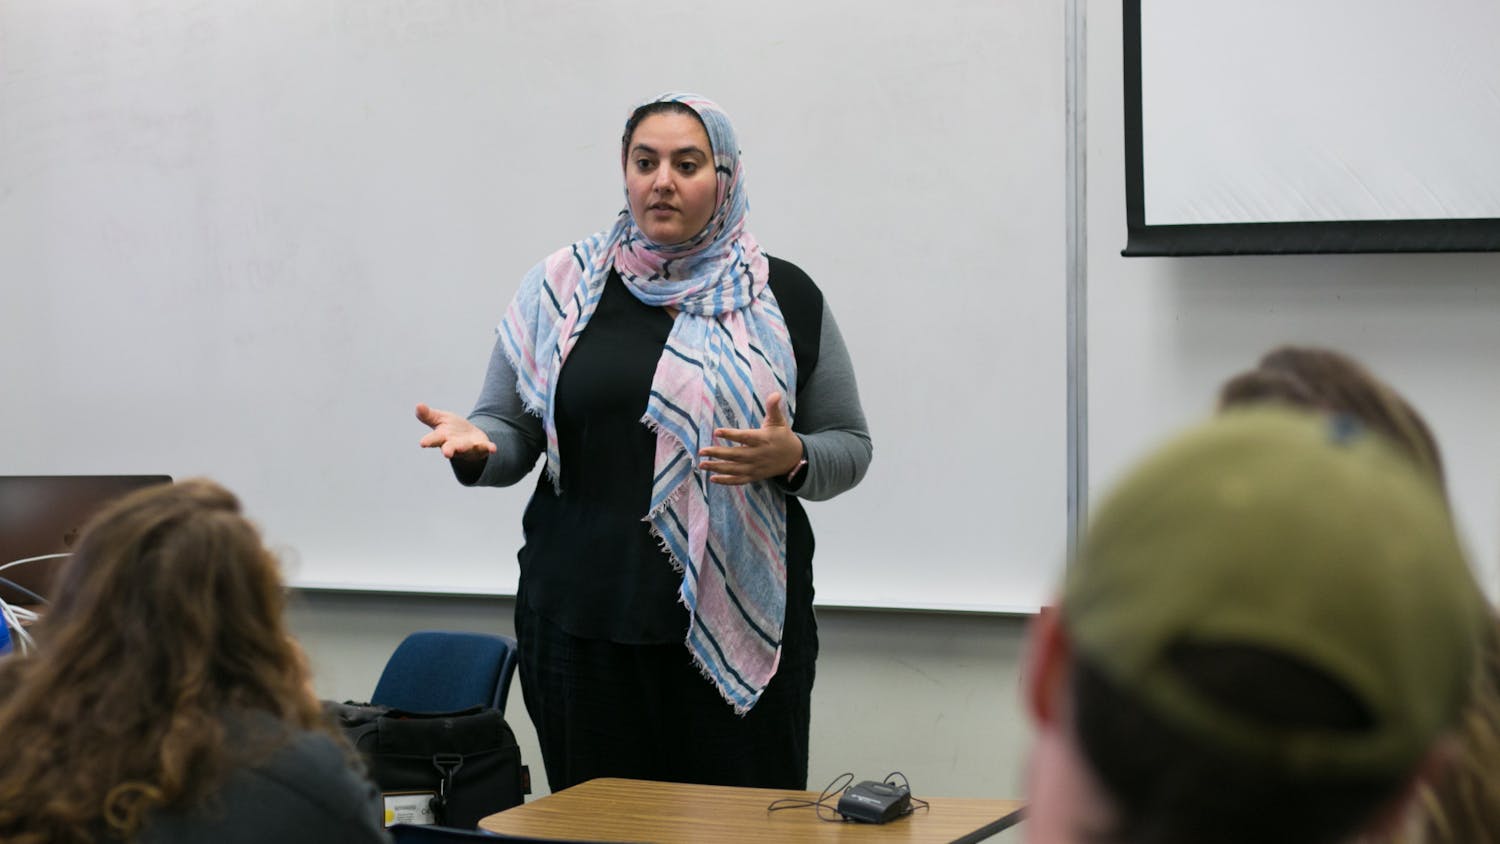 Iman Zawahry was president of Islam on Campus during 9/11. Now, Zawahry teaches media production, management and technology at UF’s College of Journalism and Communications.